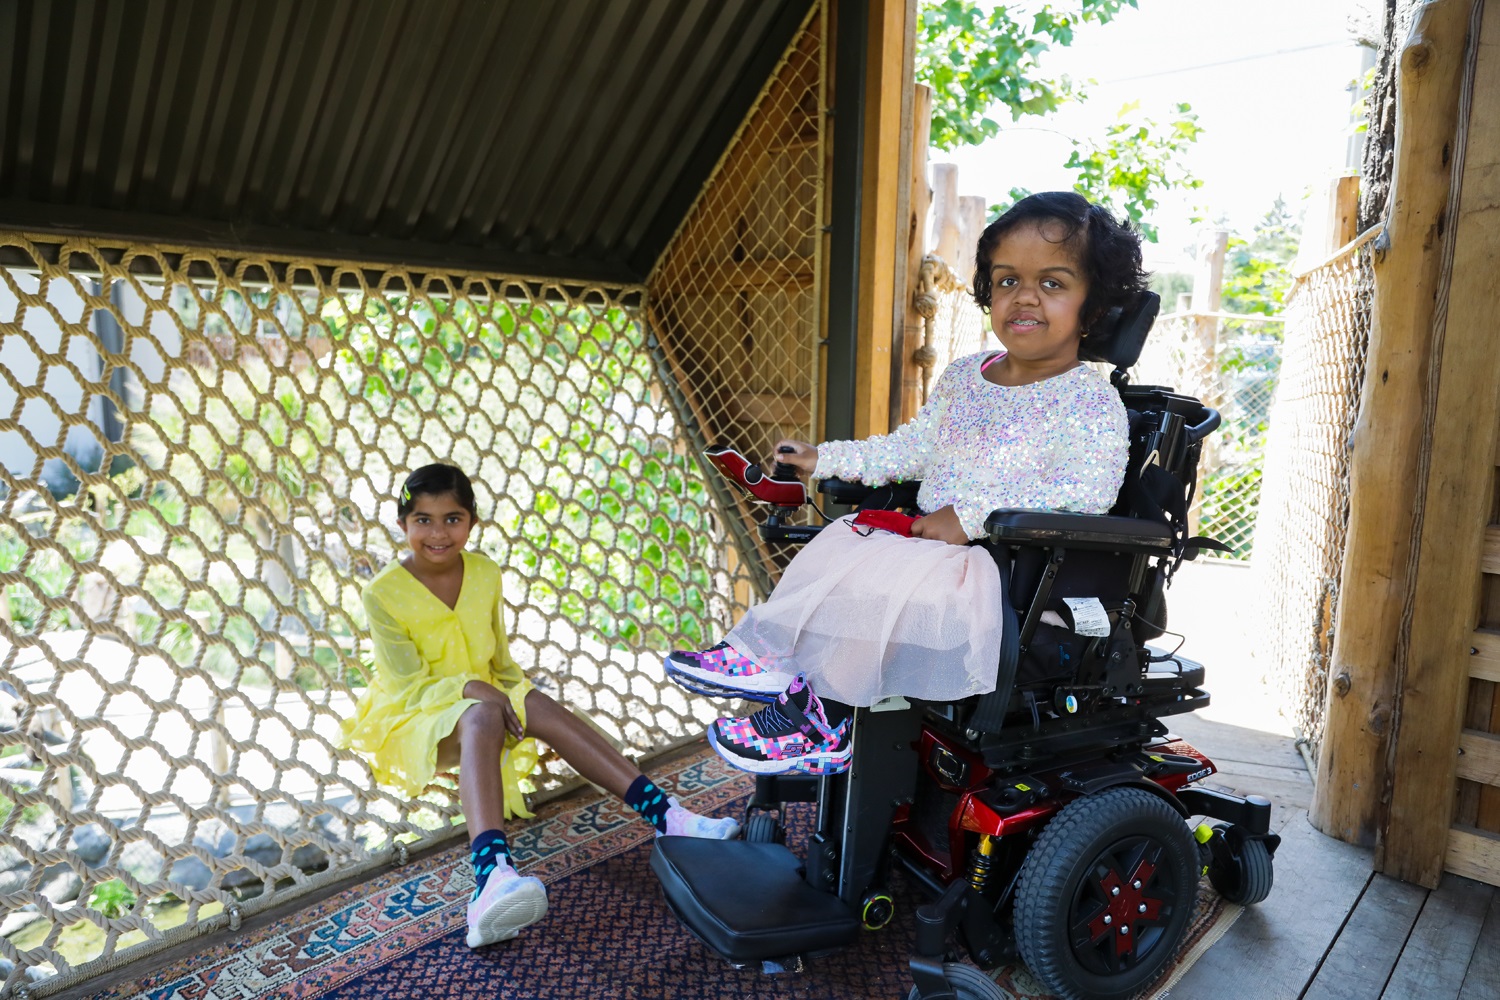 Two children sit side by side: one in a wheelchair, and one on the netting of the Tree House